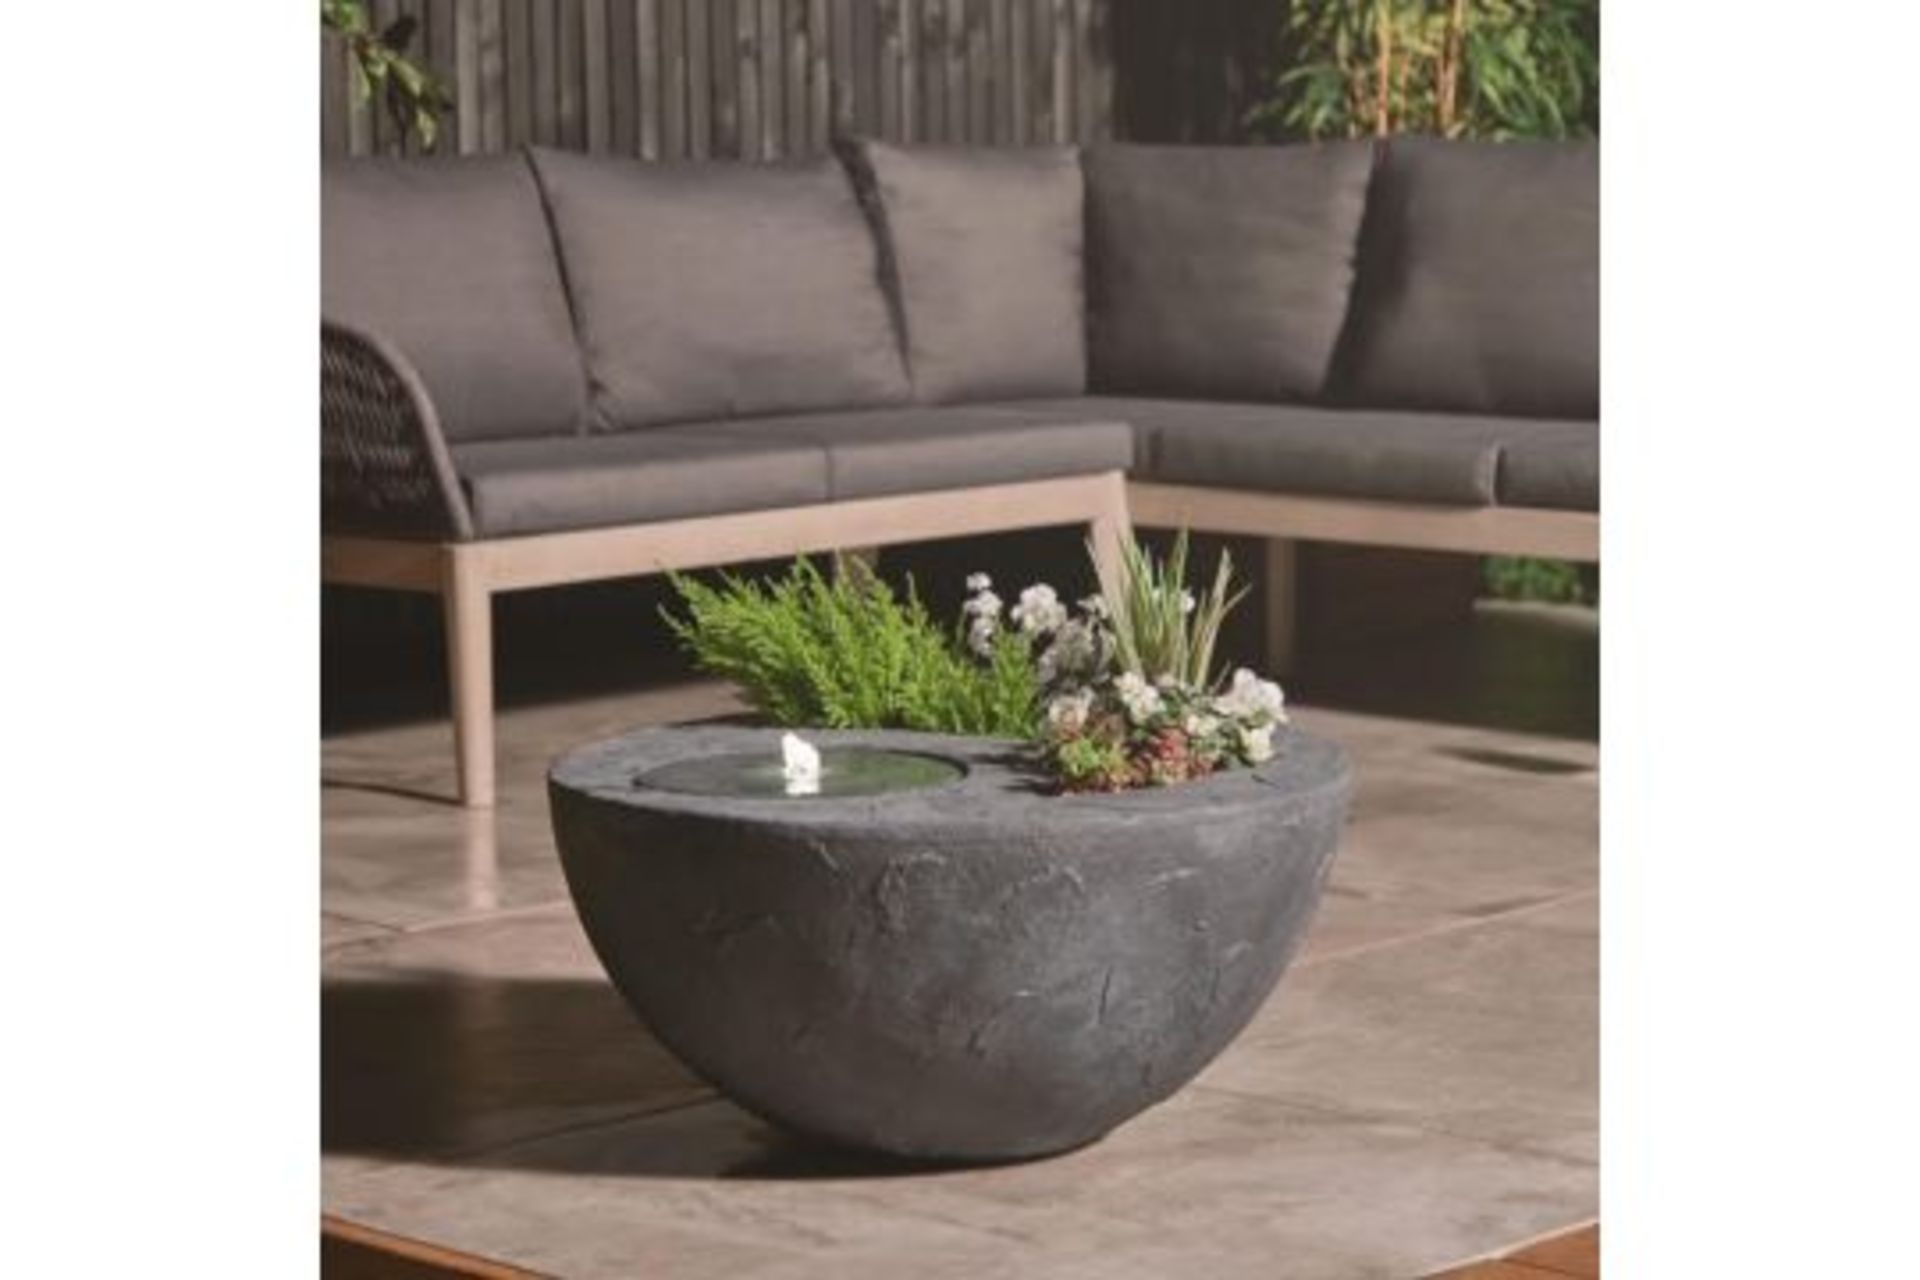 New & Boxed Dual Water Feature and Planter - Garden Bowl Design Planter, Indoor/Outdoor LED Lights - Image 2 of 4